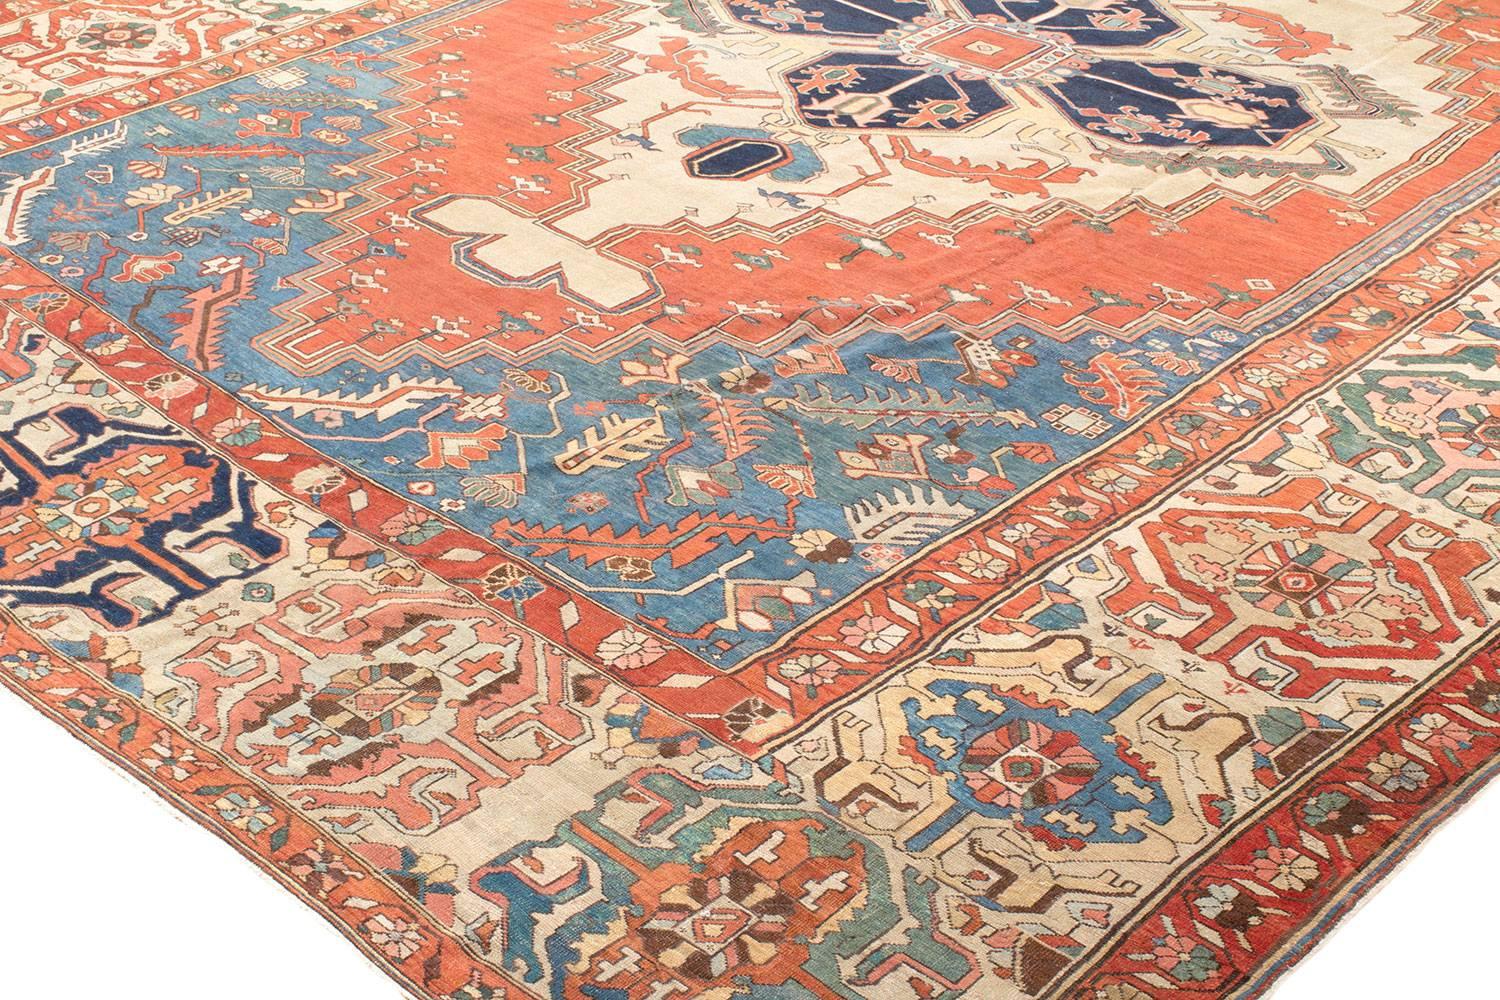 Exceptional blues are a hallmark of antique Bakshaish rugs with hues of azure, turquoise, peacock and teal. The Bakshaish carpets hold a maturity of color obtained by the masterful use of natural dyes. This handwoven carpet is irreproachable.